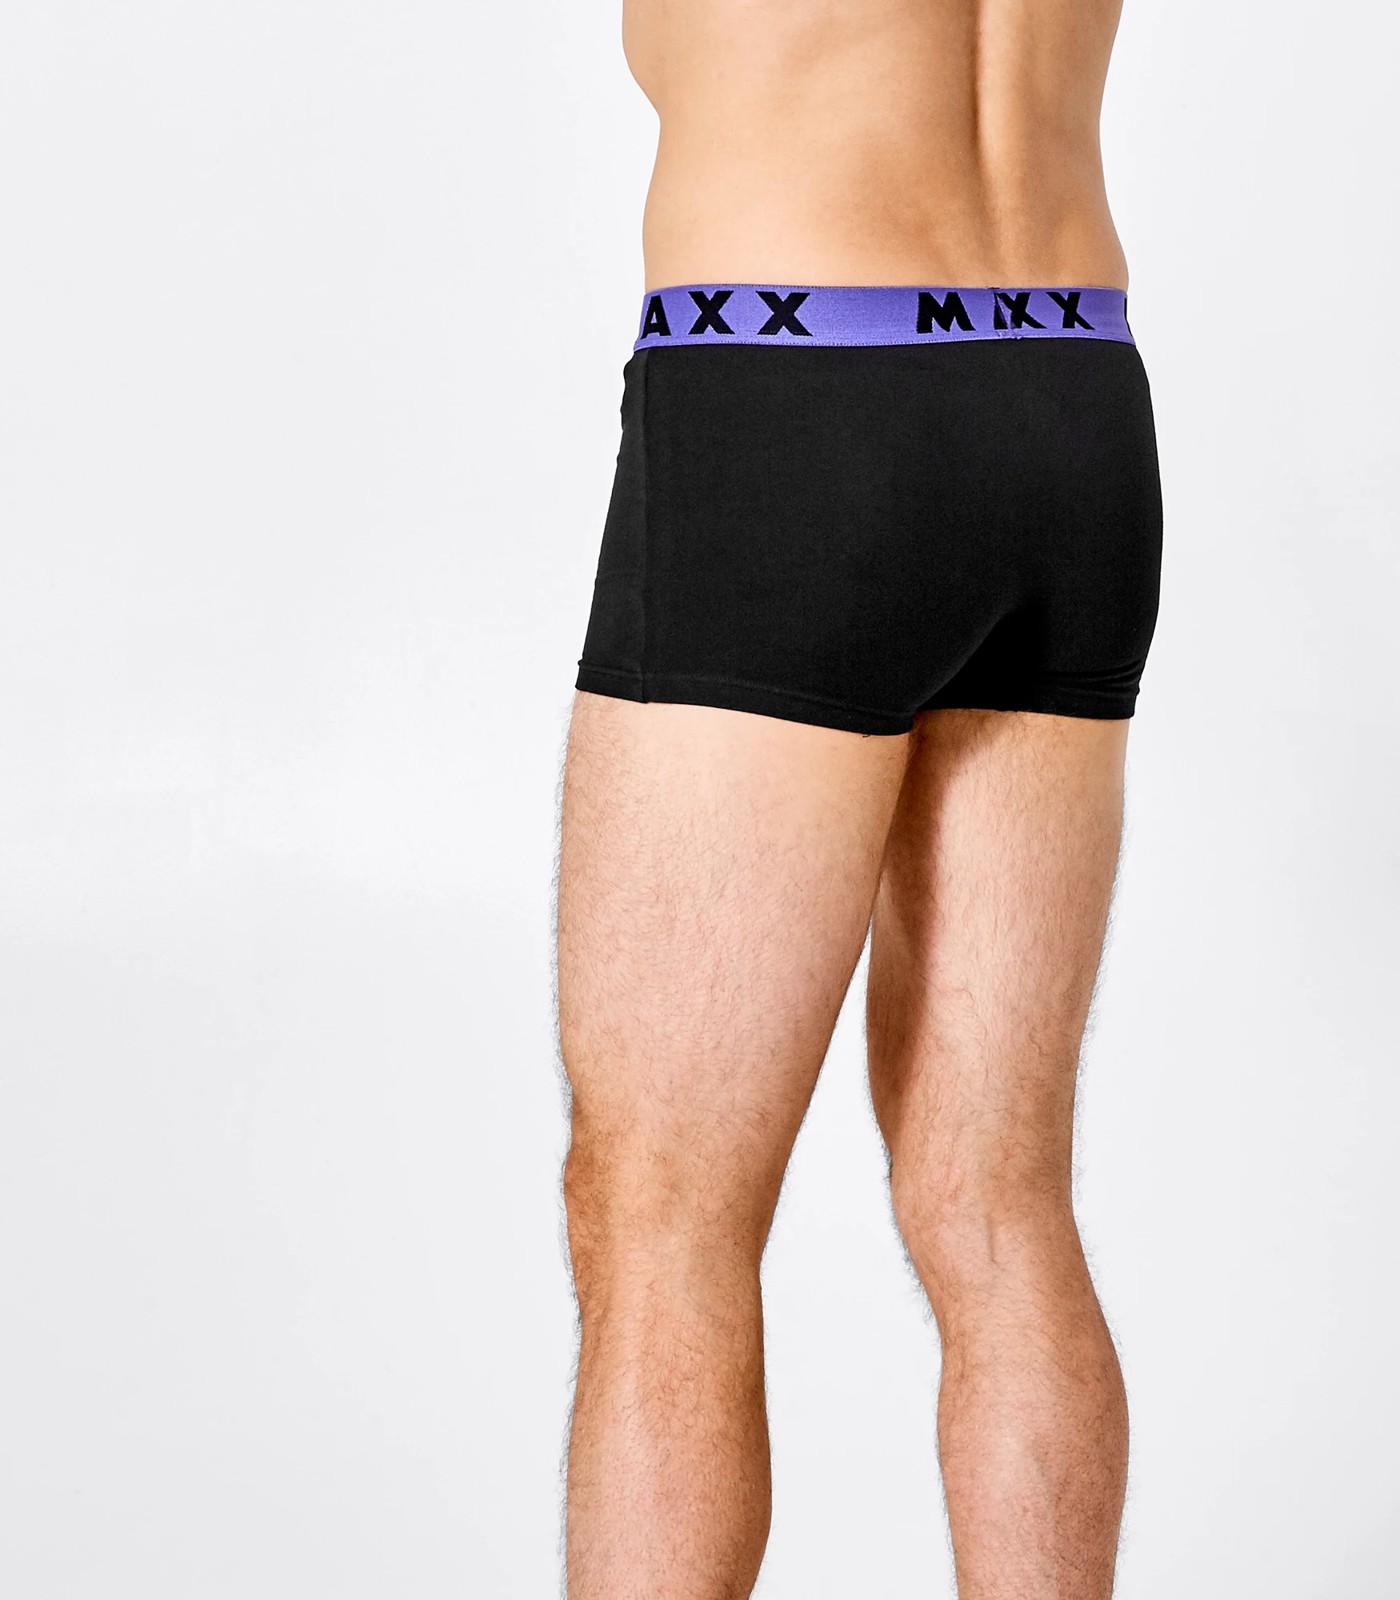 MAXX 7 Pack Trunks (Sizes Small to XXL) - $15 (Was $25) @ Target